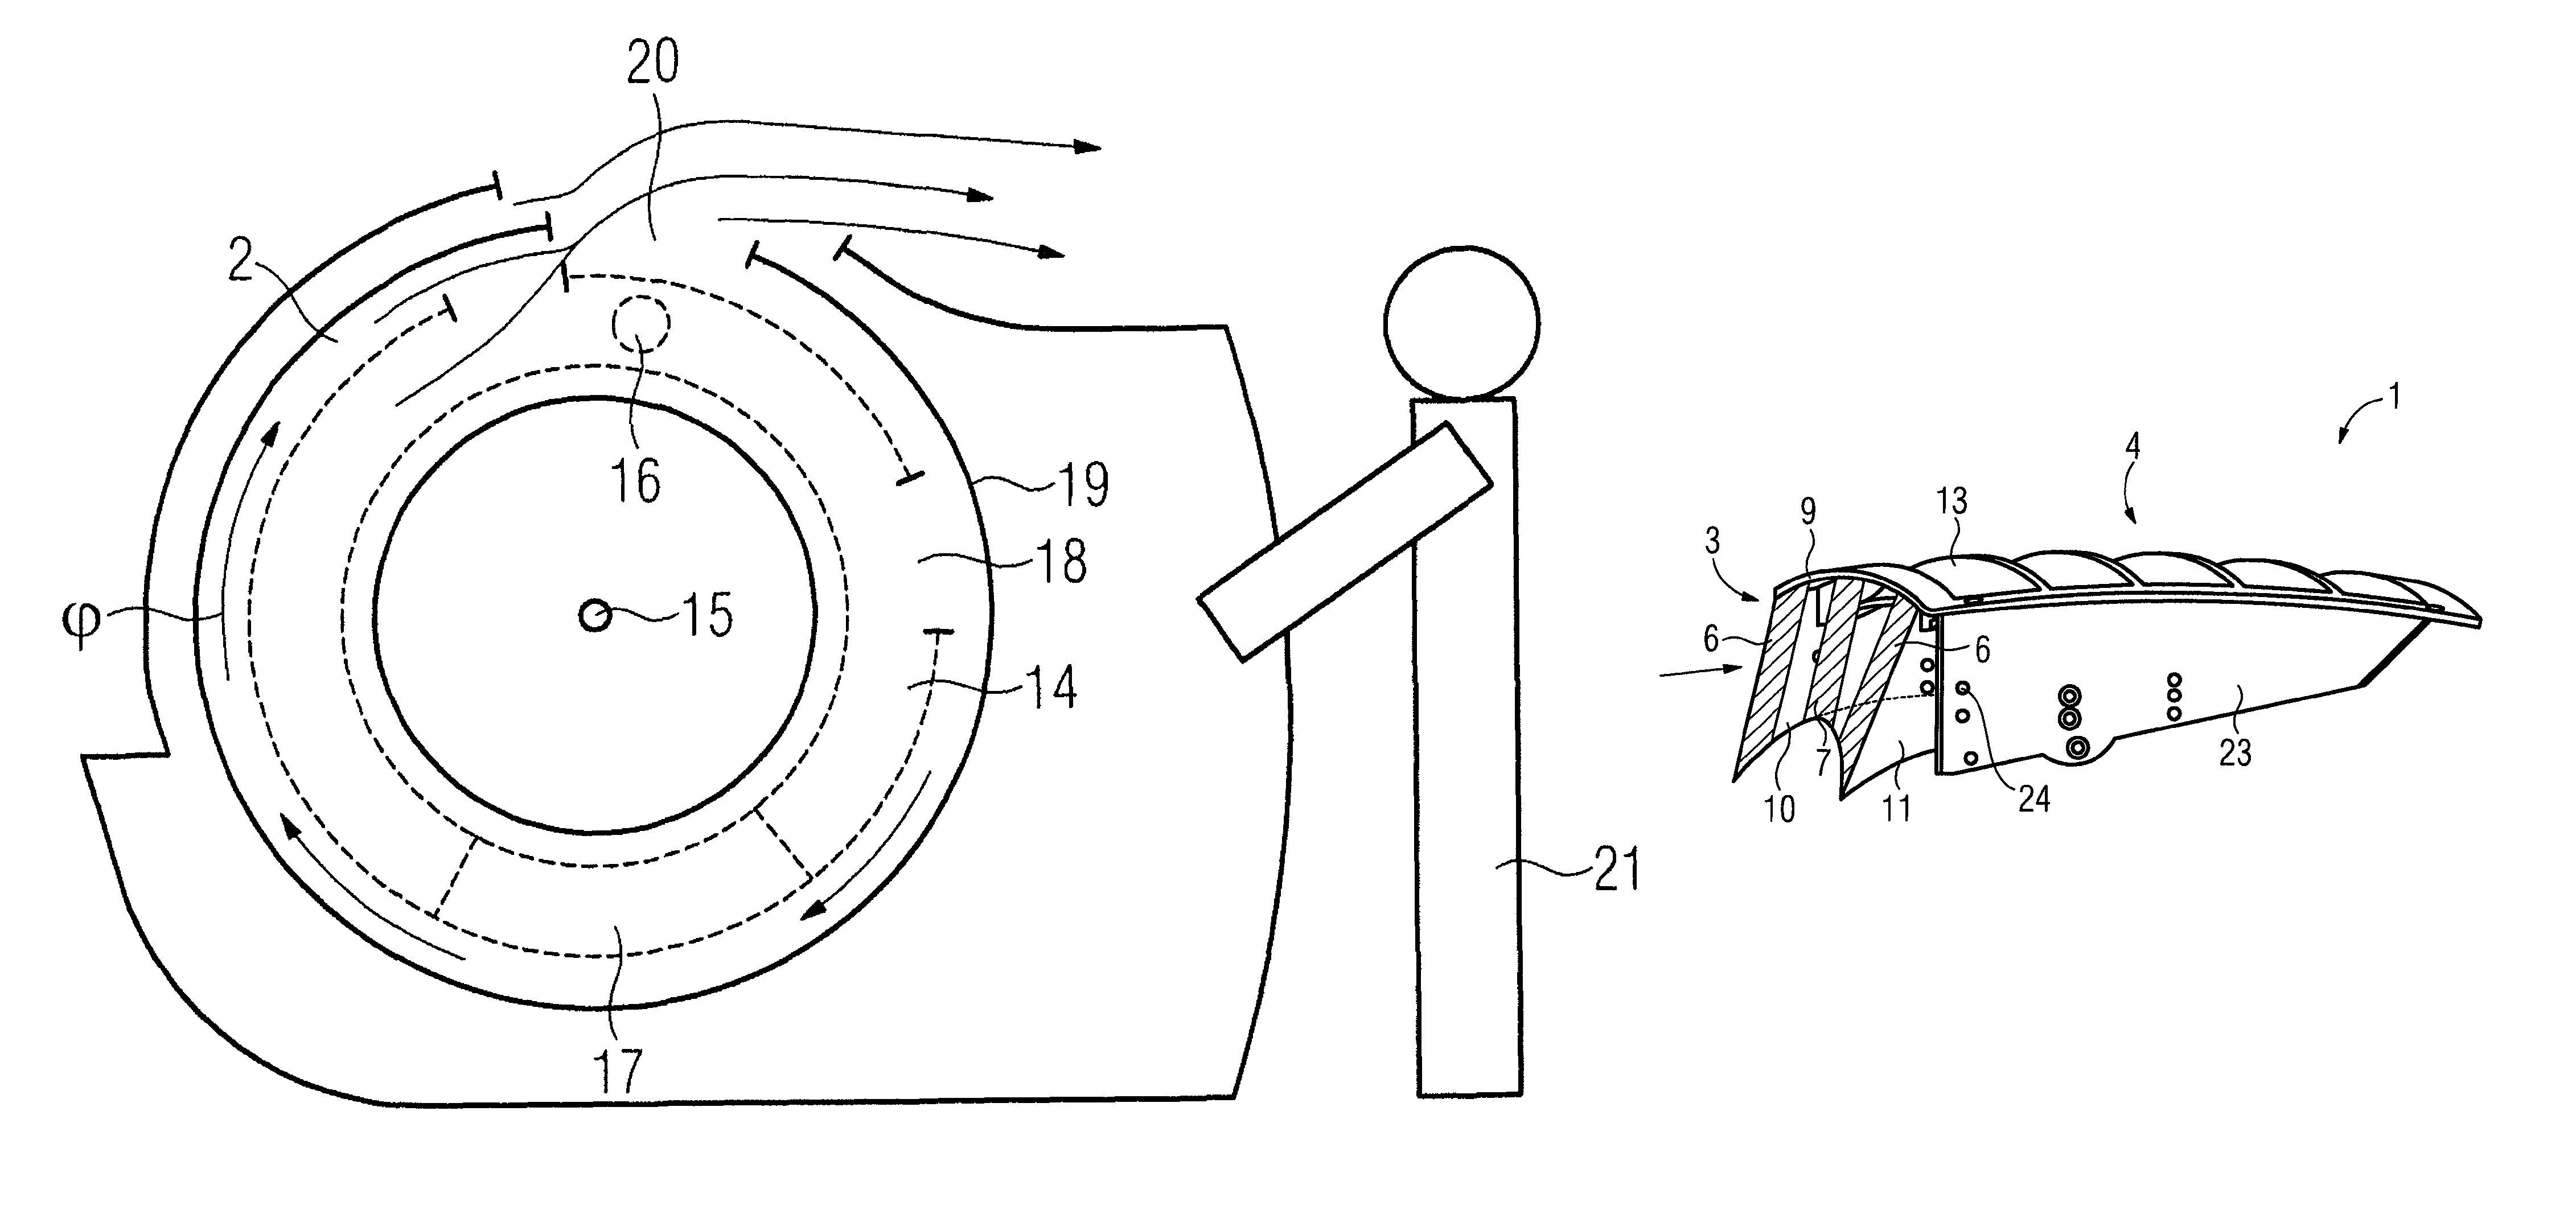 Tomography apparatus with an annular airflow channel with an air-diverting ventilation element